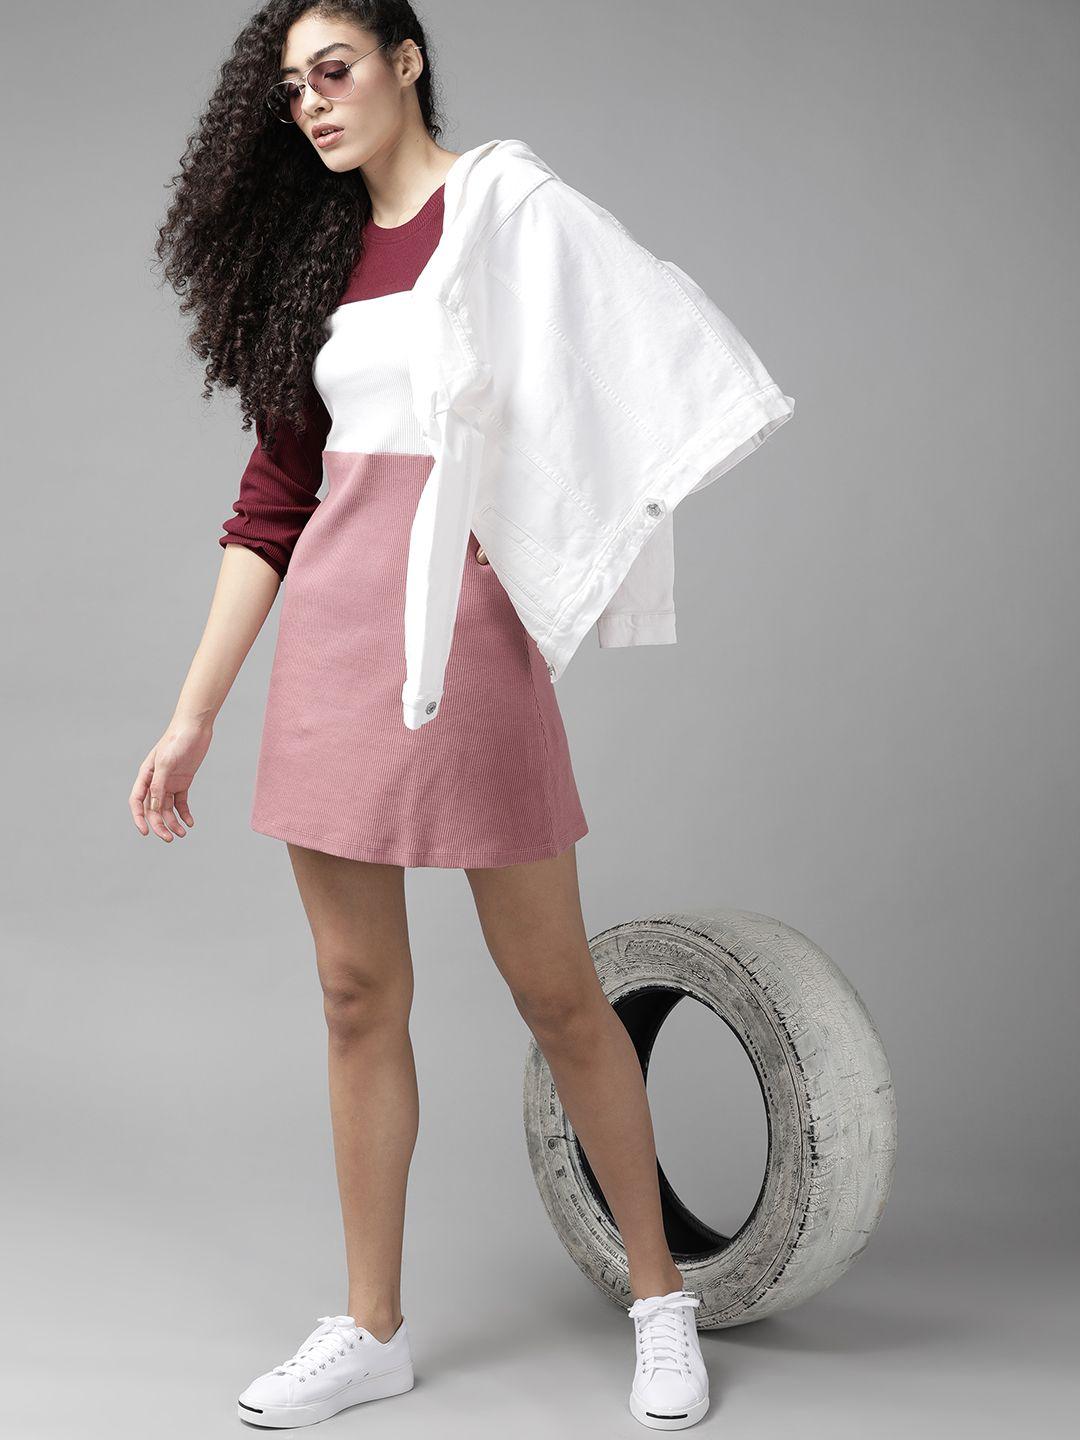 roadster pink & white colourblocked a-line dress